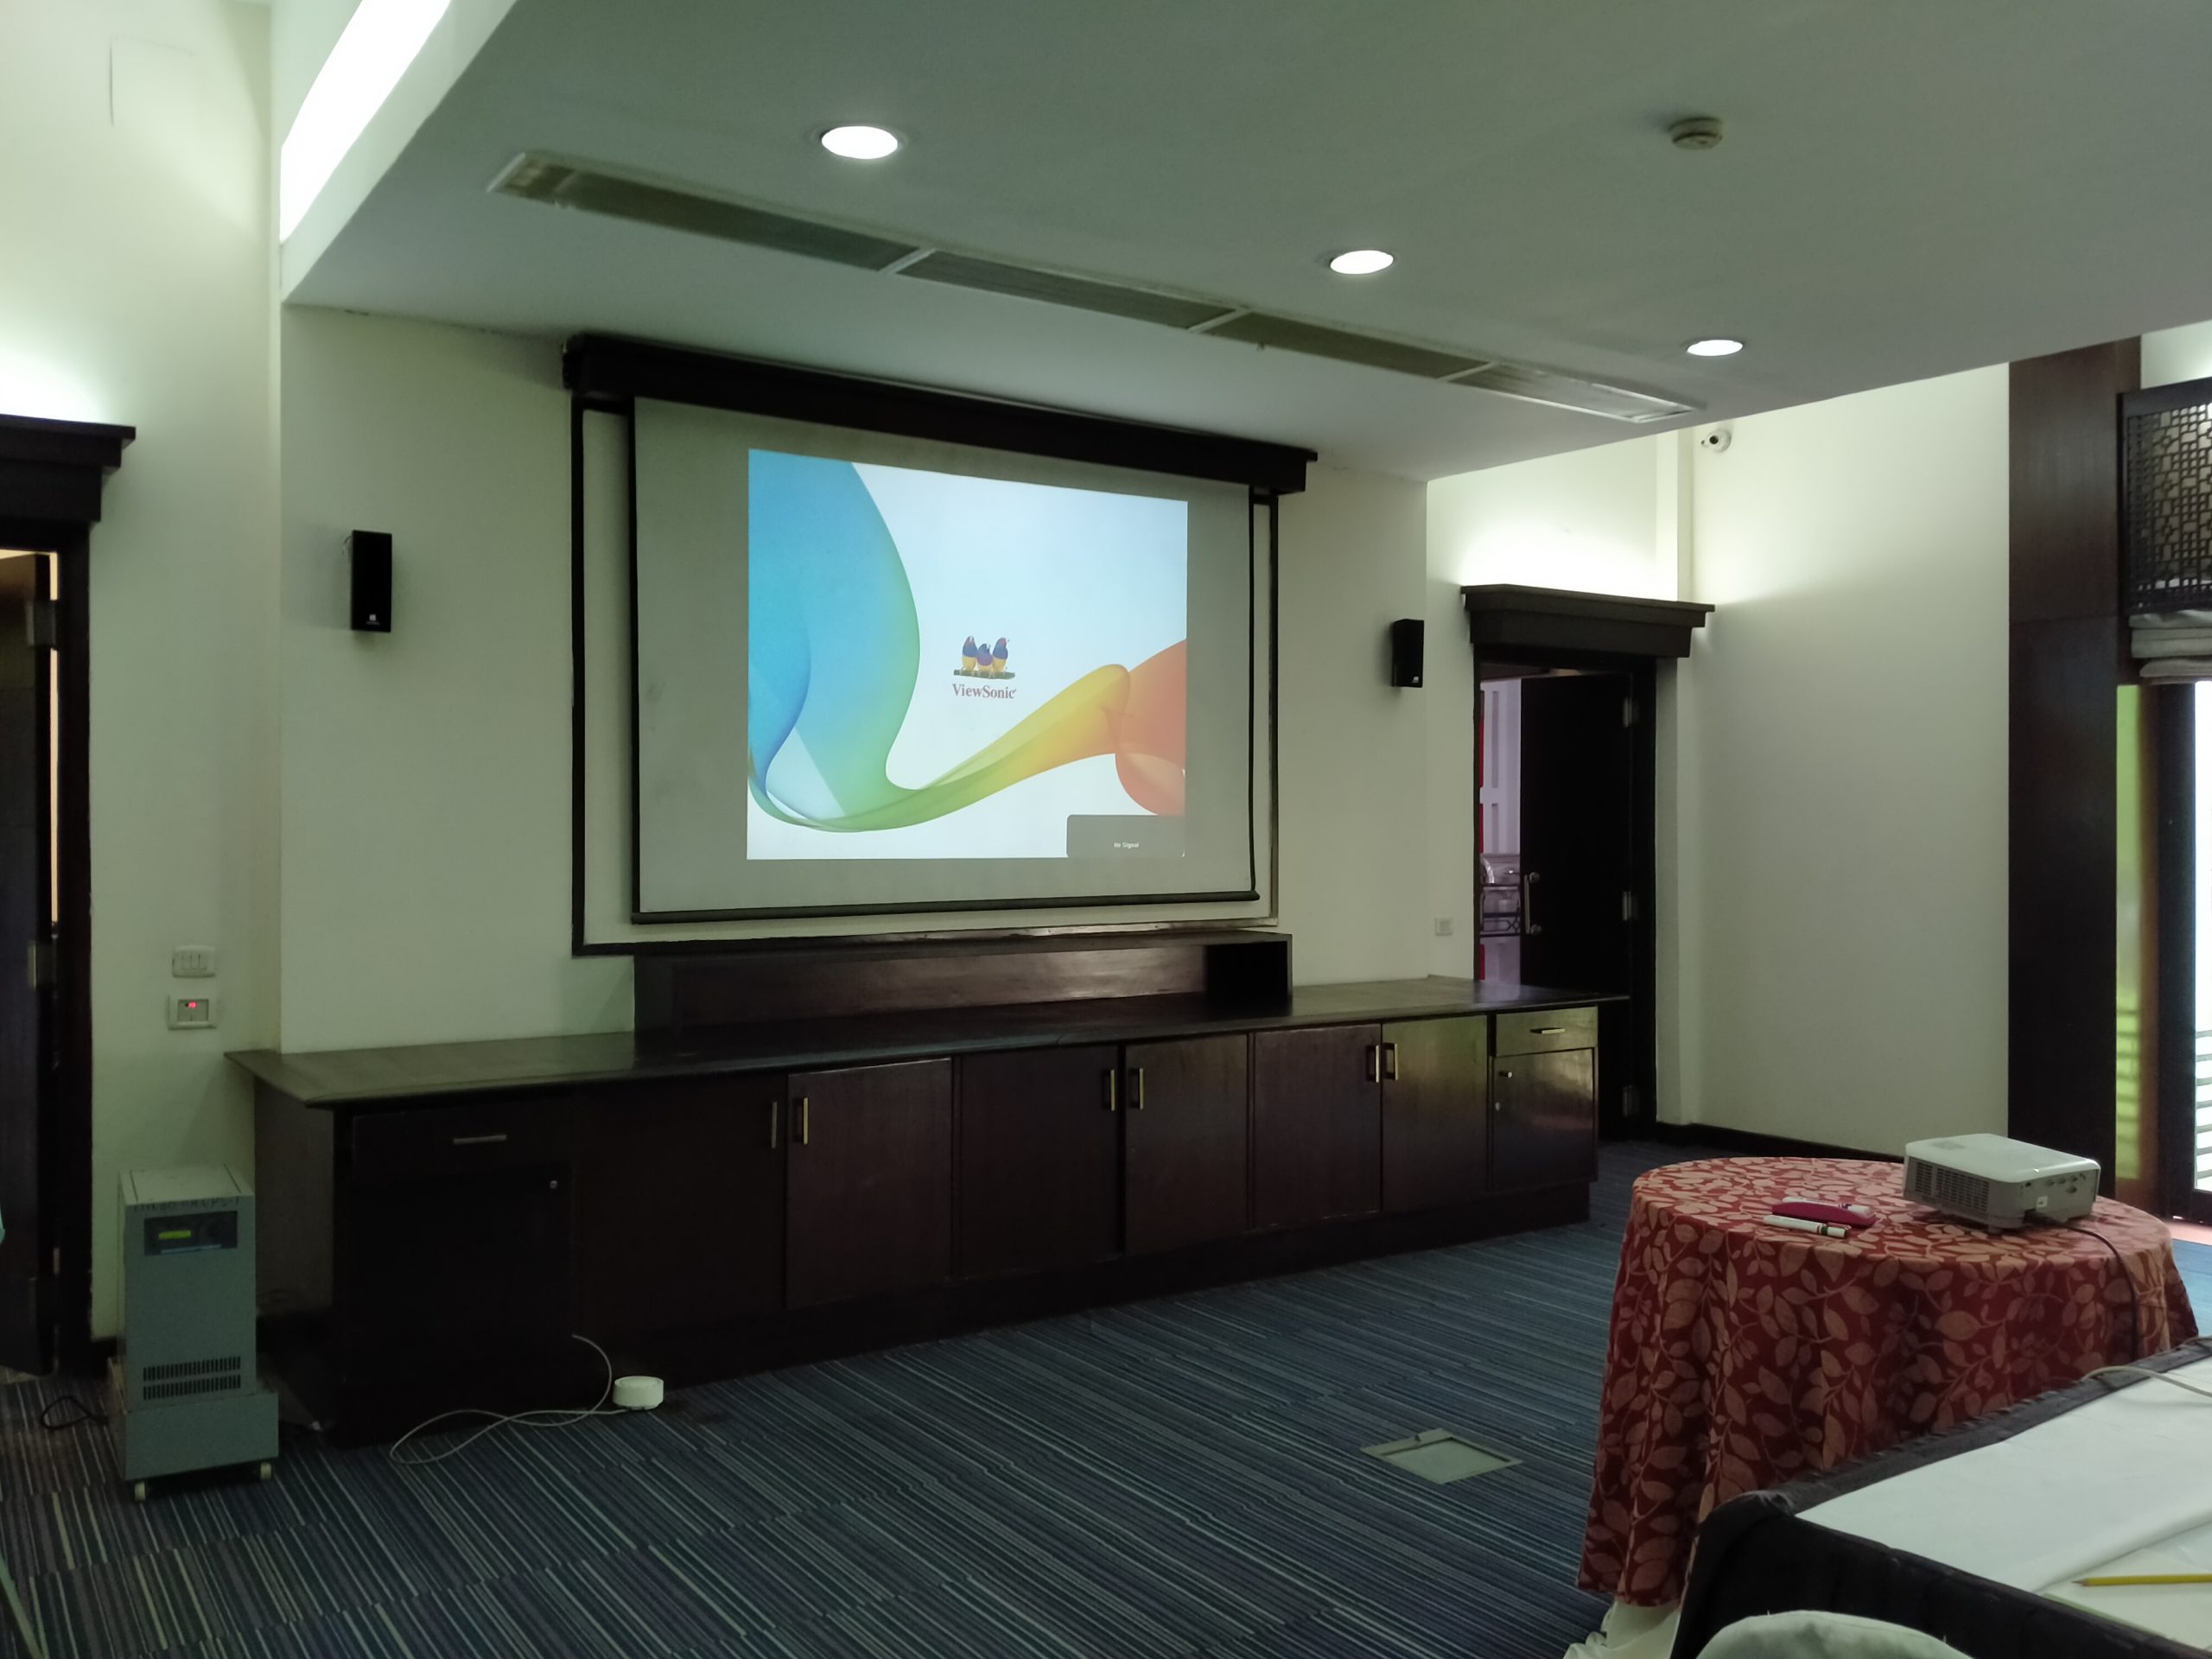 Projector on rent in Gurgaon